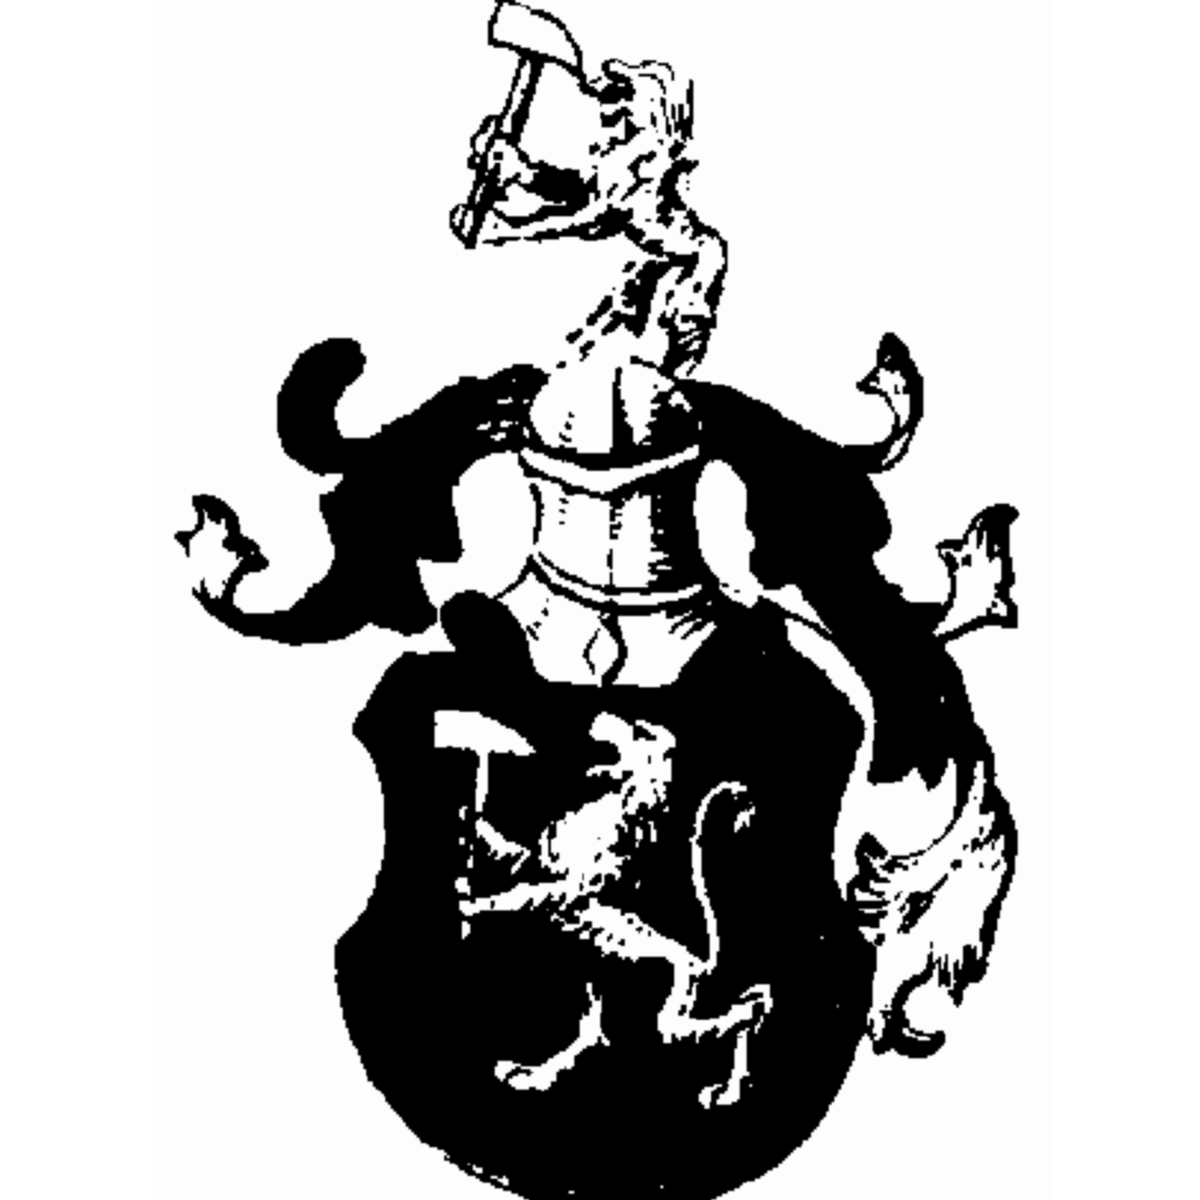 Coat of arms of family Perrot